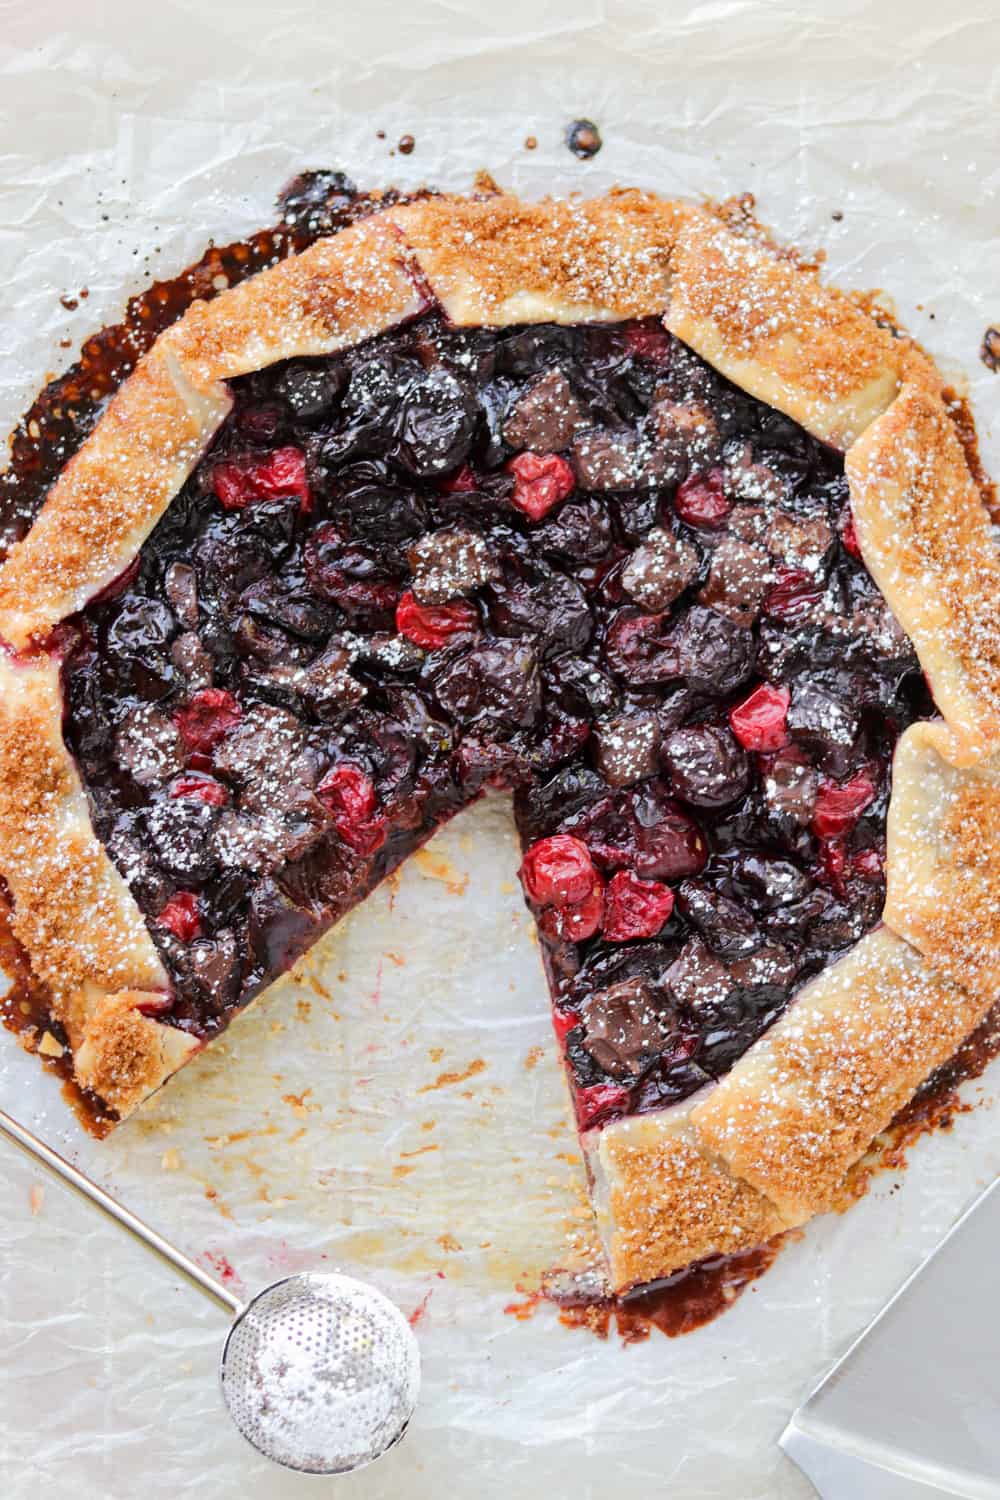 A piece removed from a galette with cherries and dark chocolate.